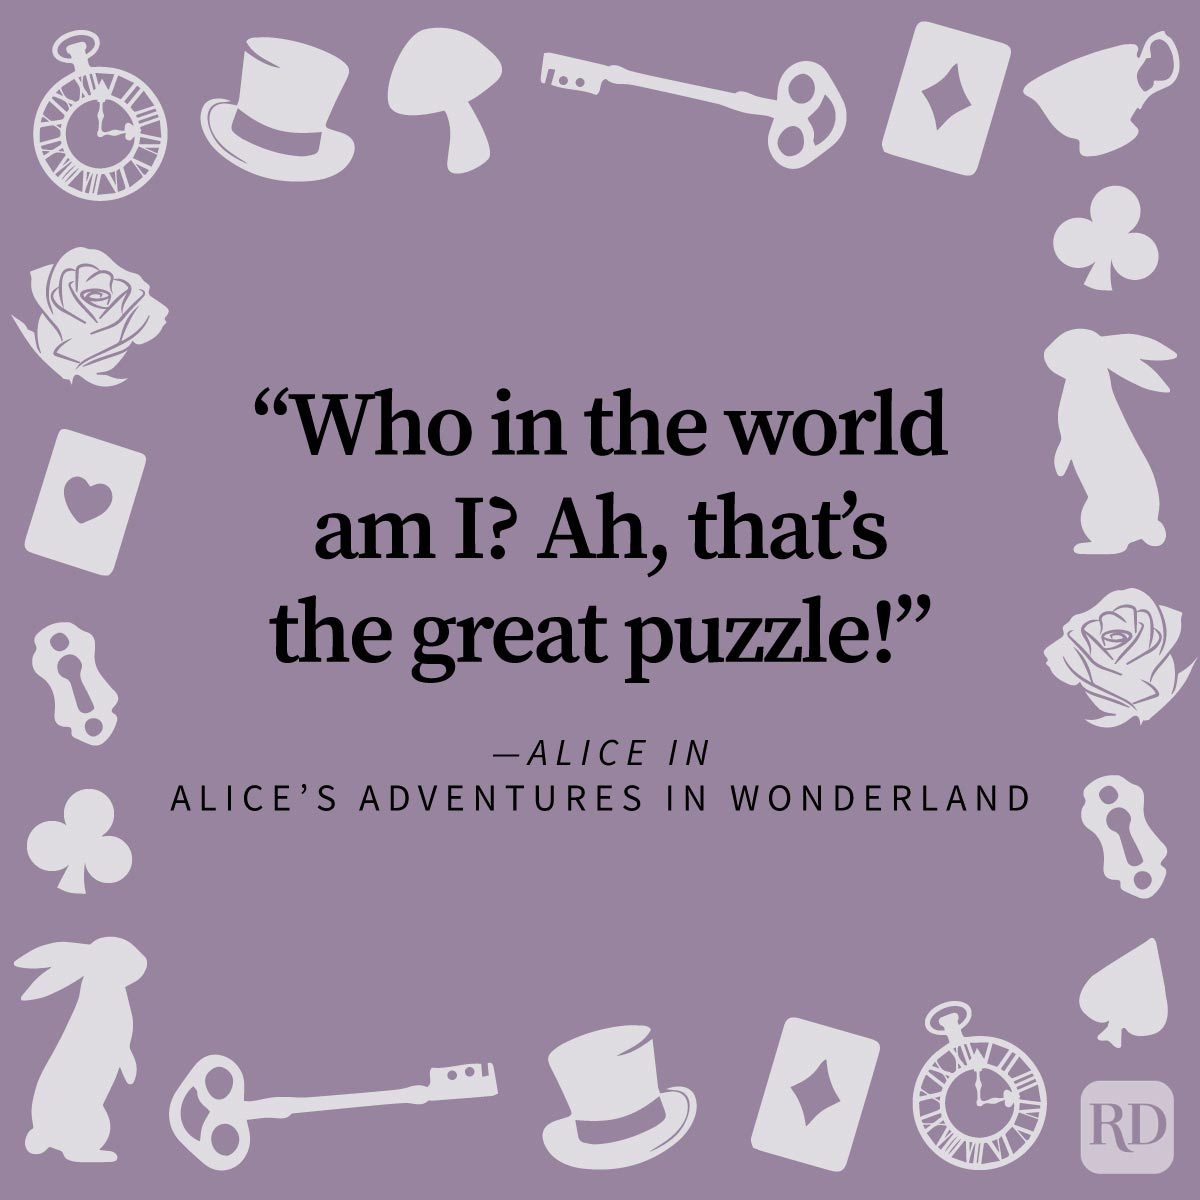 <p>23. "Curiouser and curiouser!" —<em>Alice in</em> Alice’s Adventures in Wonderland</p> <p>24. "I do wish I hadn't drunk quite so much!" —<em>Alice in</em> Alice’s Adventures in Wonderland</p> <p>25. "'I could tell you my adventures—beginning from this morning,' said Alice a little timidly: 'but it's no use going back to yesterday, because I was a different person then.'" —<em>Alice in</em> Alice’s Adventures in Wonderland</p> <p>26. "When I used to read fairy-tales, I fancied that kind of thing never happened, and now here I am in the middle of one! There ought to be a book written about me, that there ought!" —<em>Alice in</em> Alice’s Adventures in Wonderland</p> <p>27. "And what is the use of a book, thought Alice, without pictures or conversations?" —<em>Alice in</em> Alice’s Adventures in Wonderland</p> <p>28. "It would be so nice if something made sense for a change." —<em>Alice in Disney's</em> Alice in Wonderland</p> <p>29. "Who in the world am I? Ah, <em>that's</em> the great puzzle!" —<em>Alice in</em> Alice’s Adventures in Wonderland</p> <p>30. "'Who cares for you?' said Alice, (she had grown to her full size by this time.) 'You're nothing but a pack of cards!'" —<em>Alice in</em> Alice’s Adventures in Wonderland</p> <p>Alice is endlessly curious, extremely trusting and a very caring young woman. Just how famous are her famous lines? Both her book and <a href="https://www.rd.com/article/disney-movie-quotes/" rel="noopener noreferrer">Disney movie quotes</a> can be found printed on T-shirts, mugs and wall posters around the world.</p>